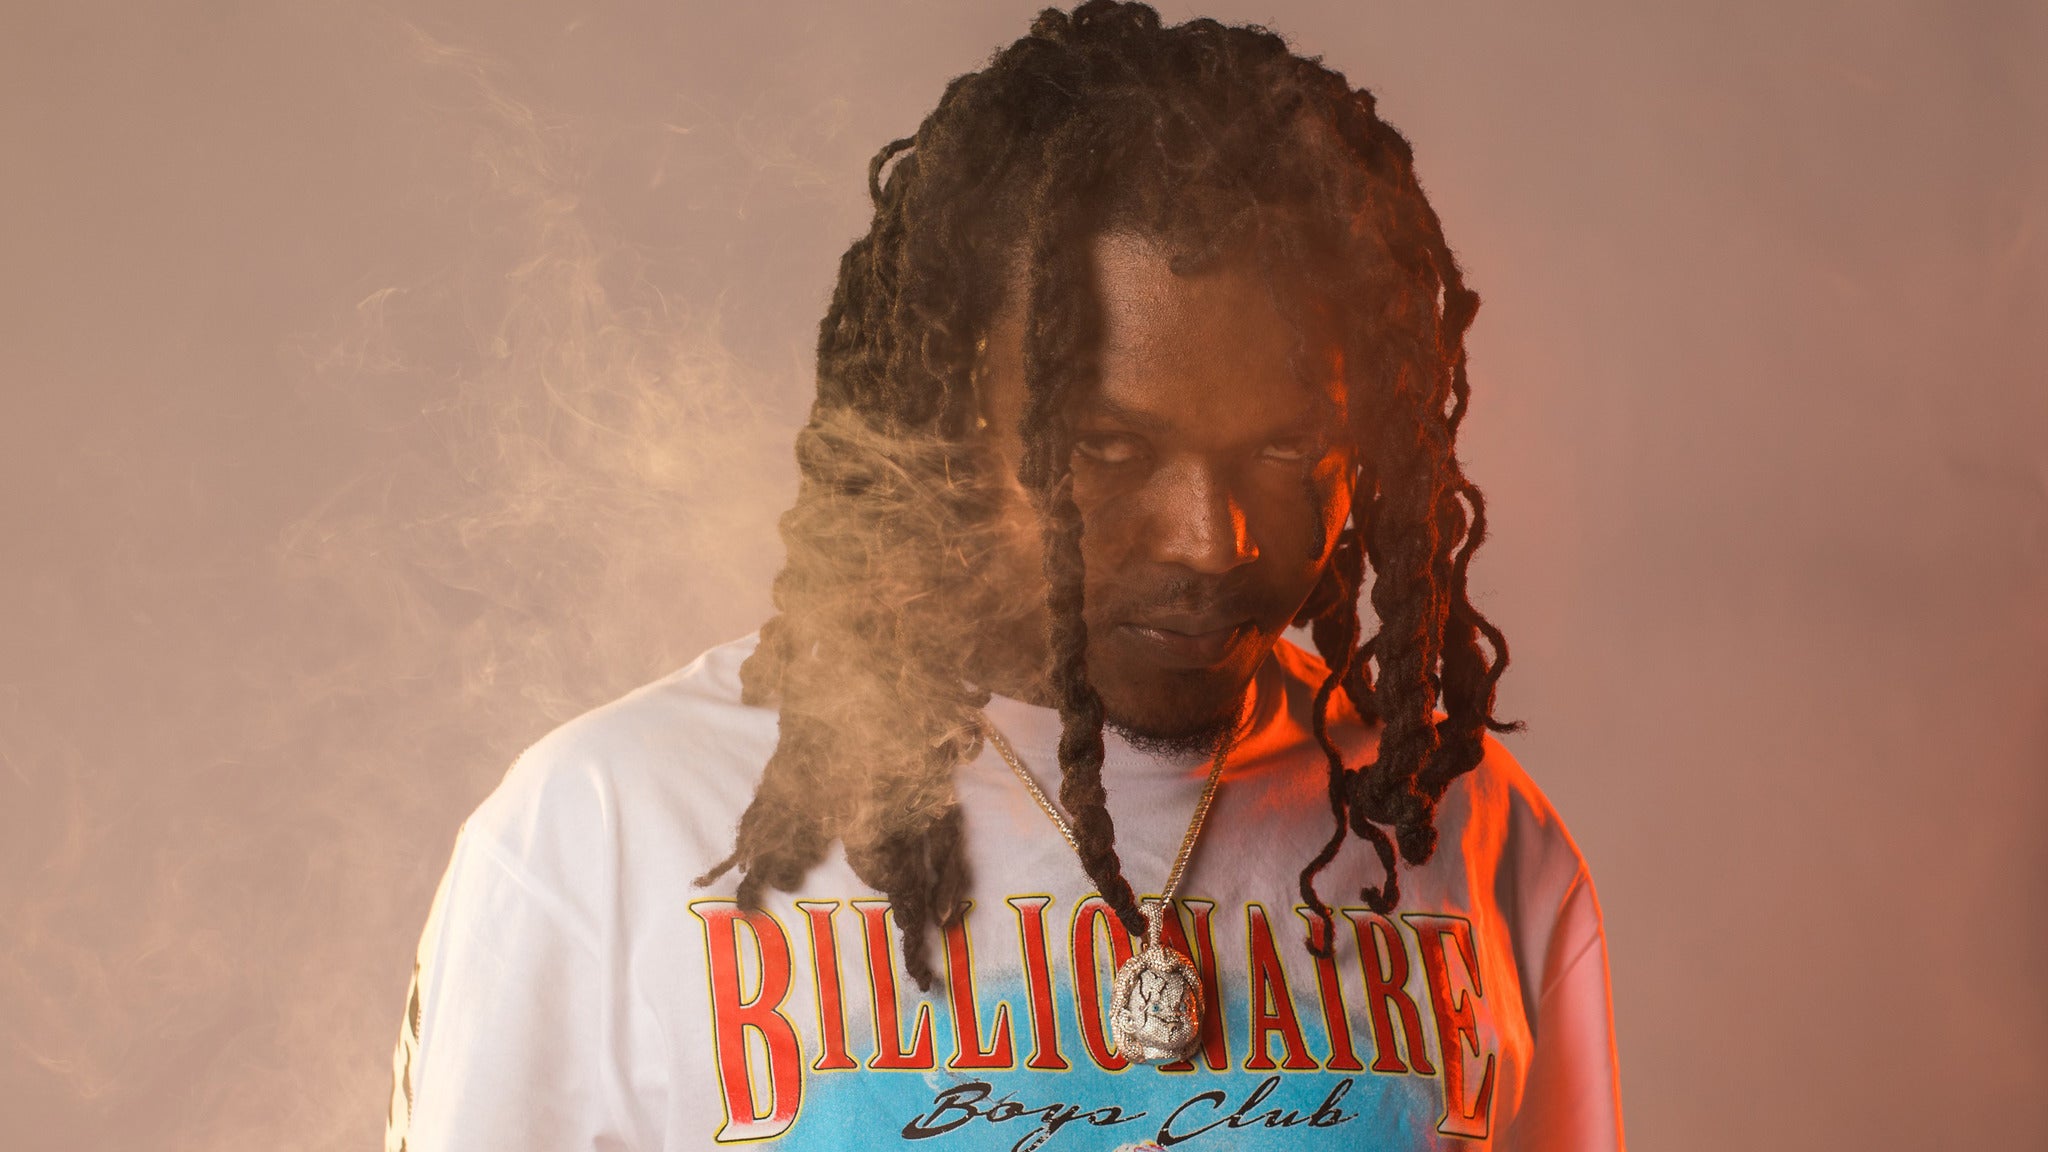 Young Nudy - DR. EV4L VS. RICH SHOOTER TOUR in Philadelphia promo photo for Live Nation presale offer code